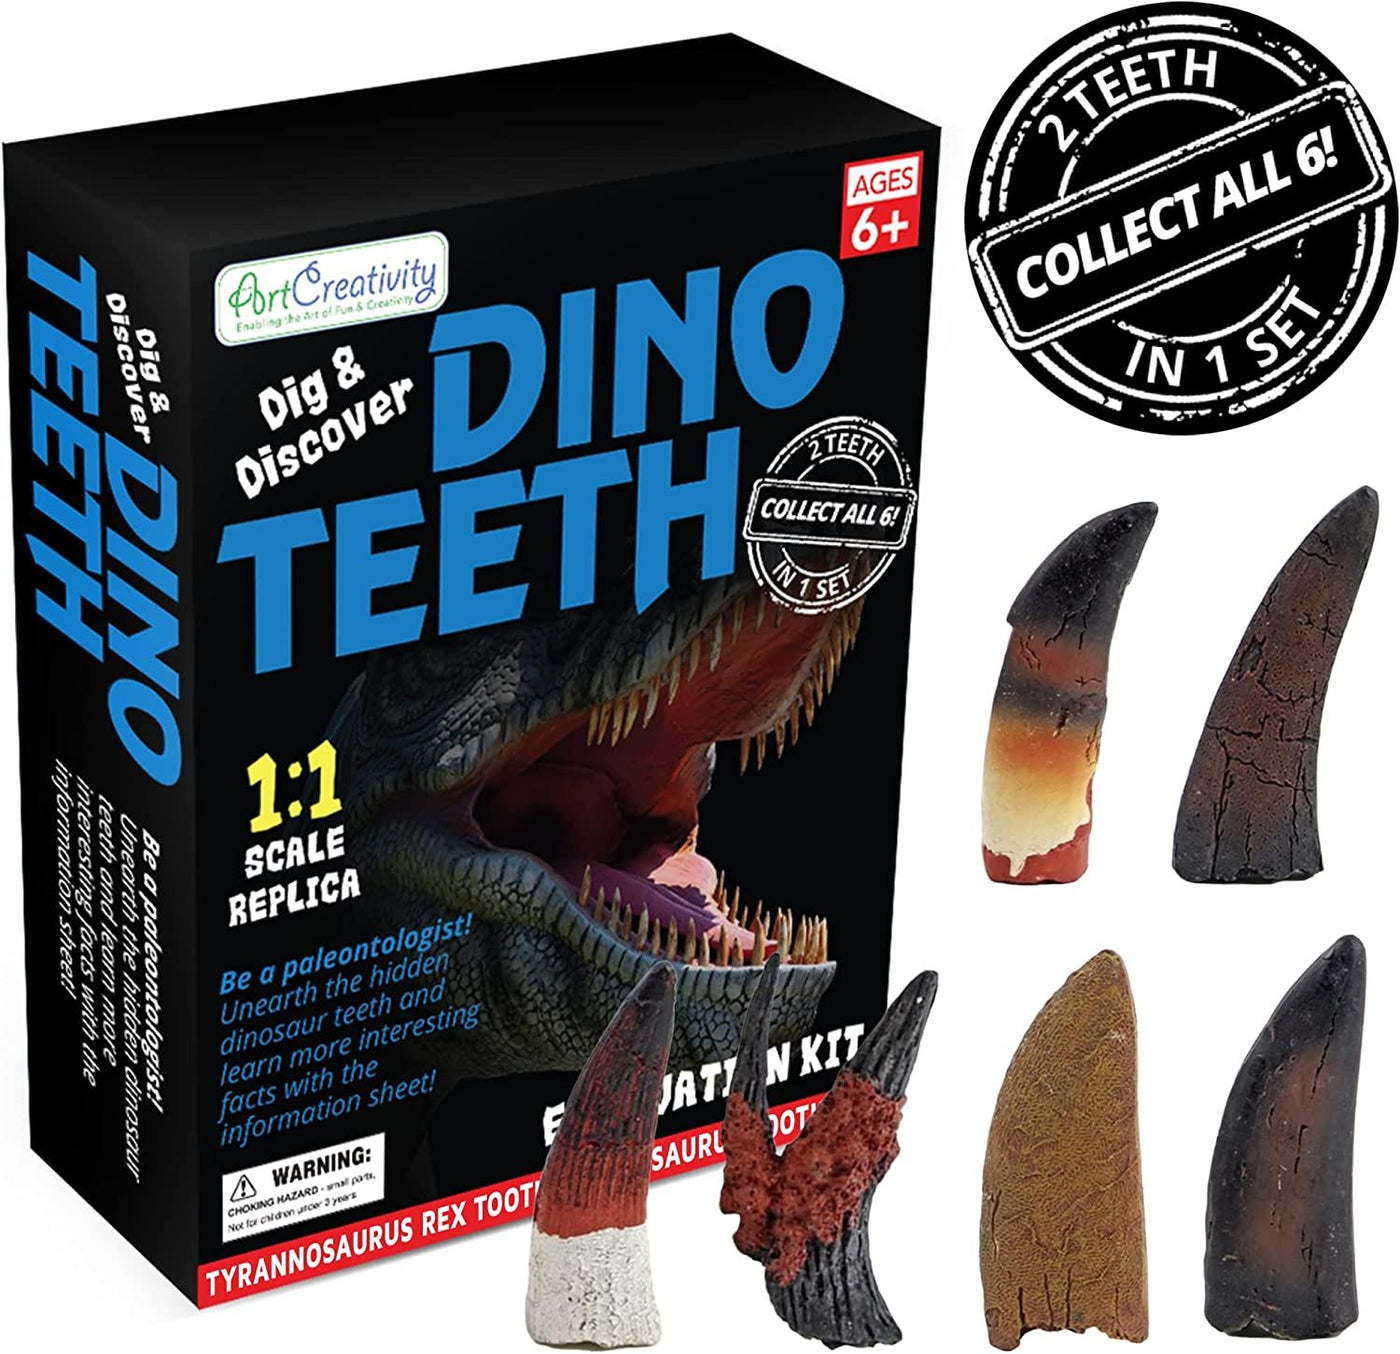 Dino Teeth Dig and Discover Excavation Kit for Kids, Includes T-rex and Tarbosaurus Toy Fossil Teeth with 2 Digging Tools, Interactive Dinosaur Gifts for Boys and Girls